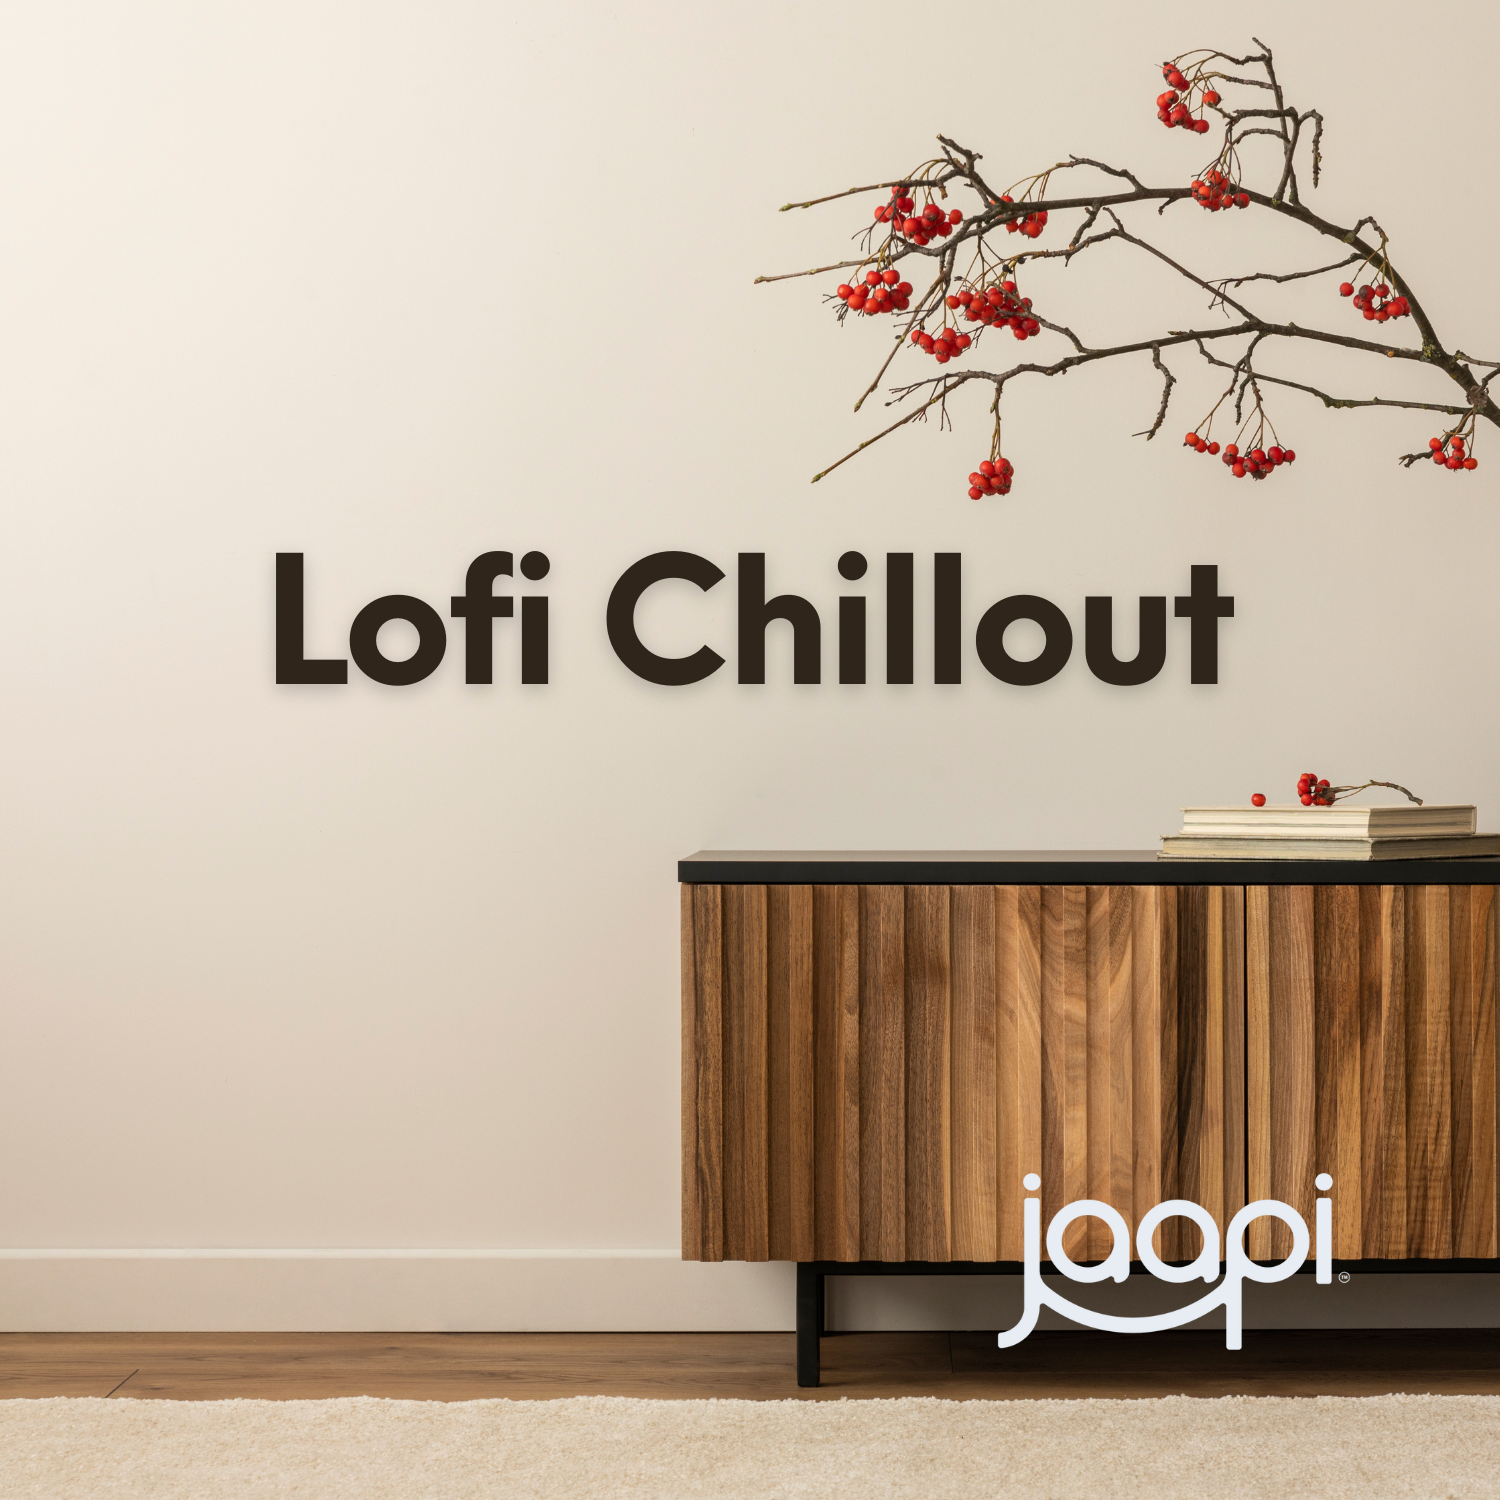 Lofi Chillout: Lofi vibes to relax, focus, and chill. Curated by Jaapi Media.